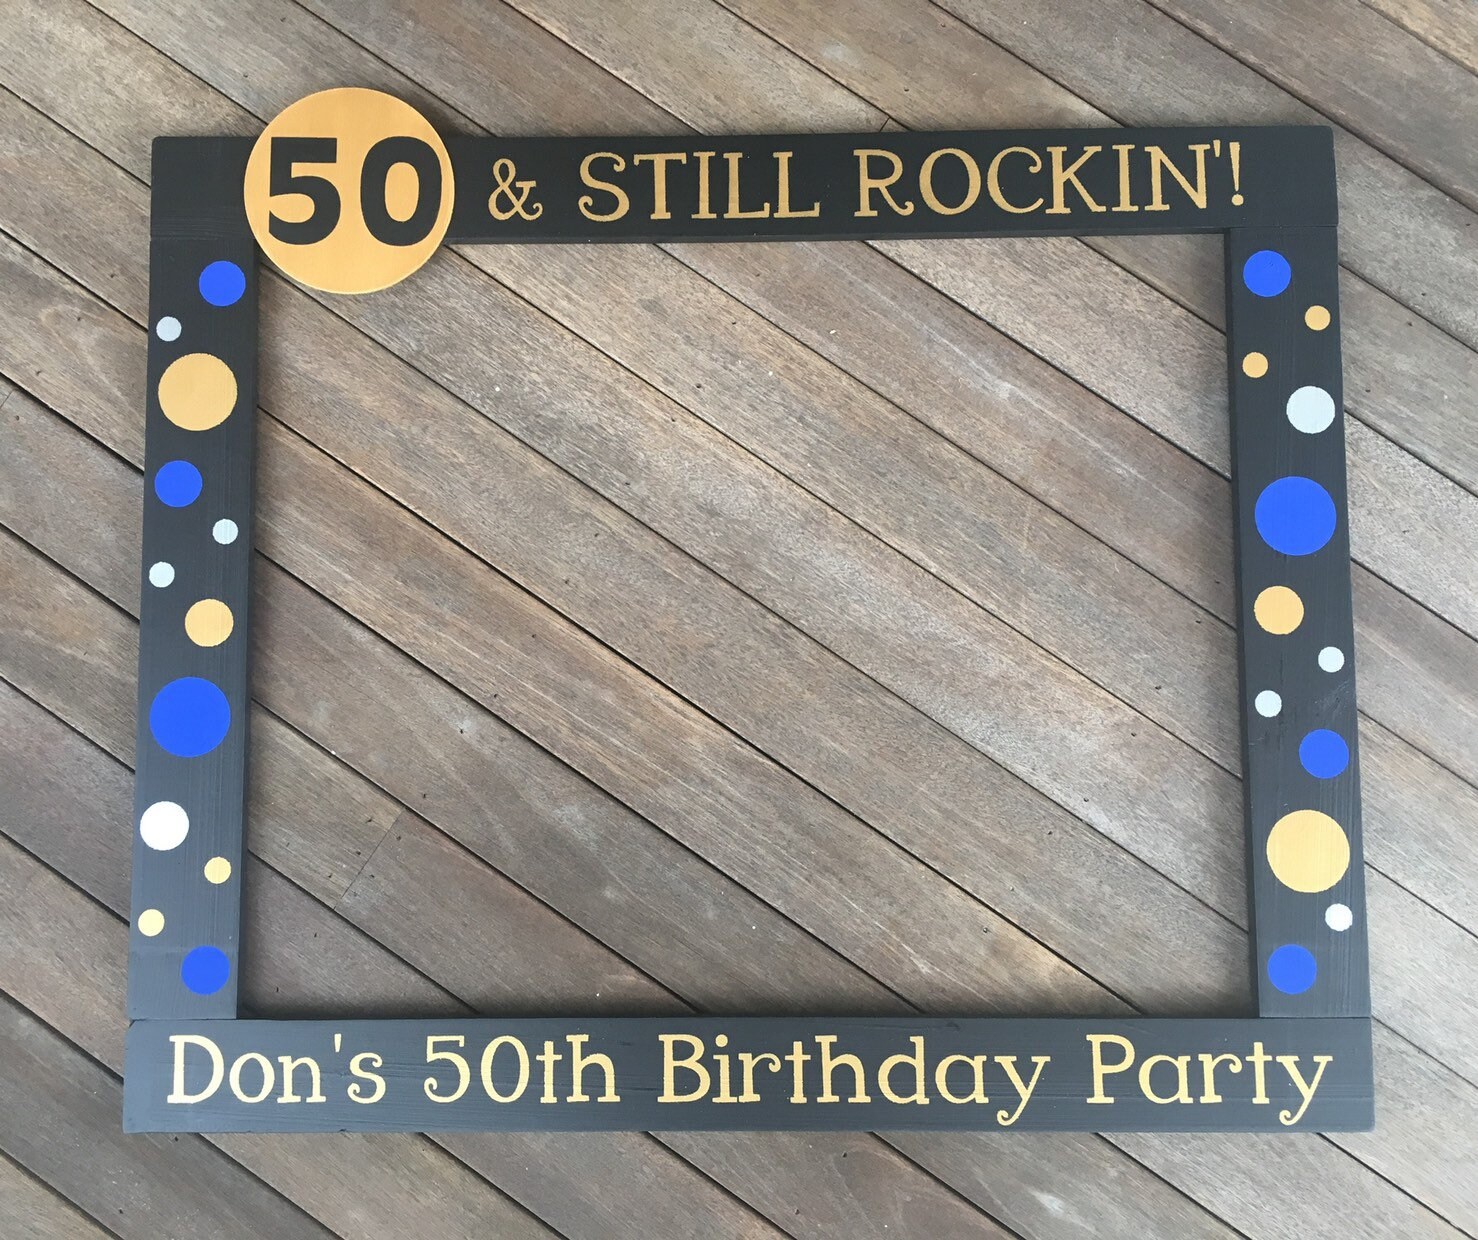 50th Birthday Photo Booth Prop Fifty and Fabulous Birthday Photo Frame Prop  Nifty Fifty Birthday Milestone Birthday Photobooth Frame 